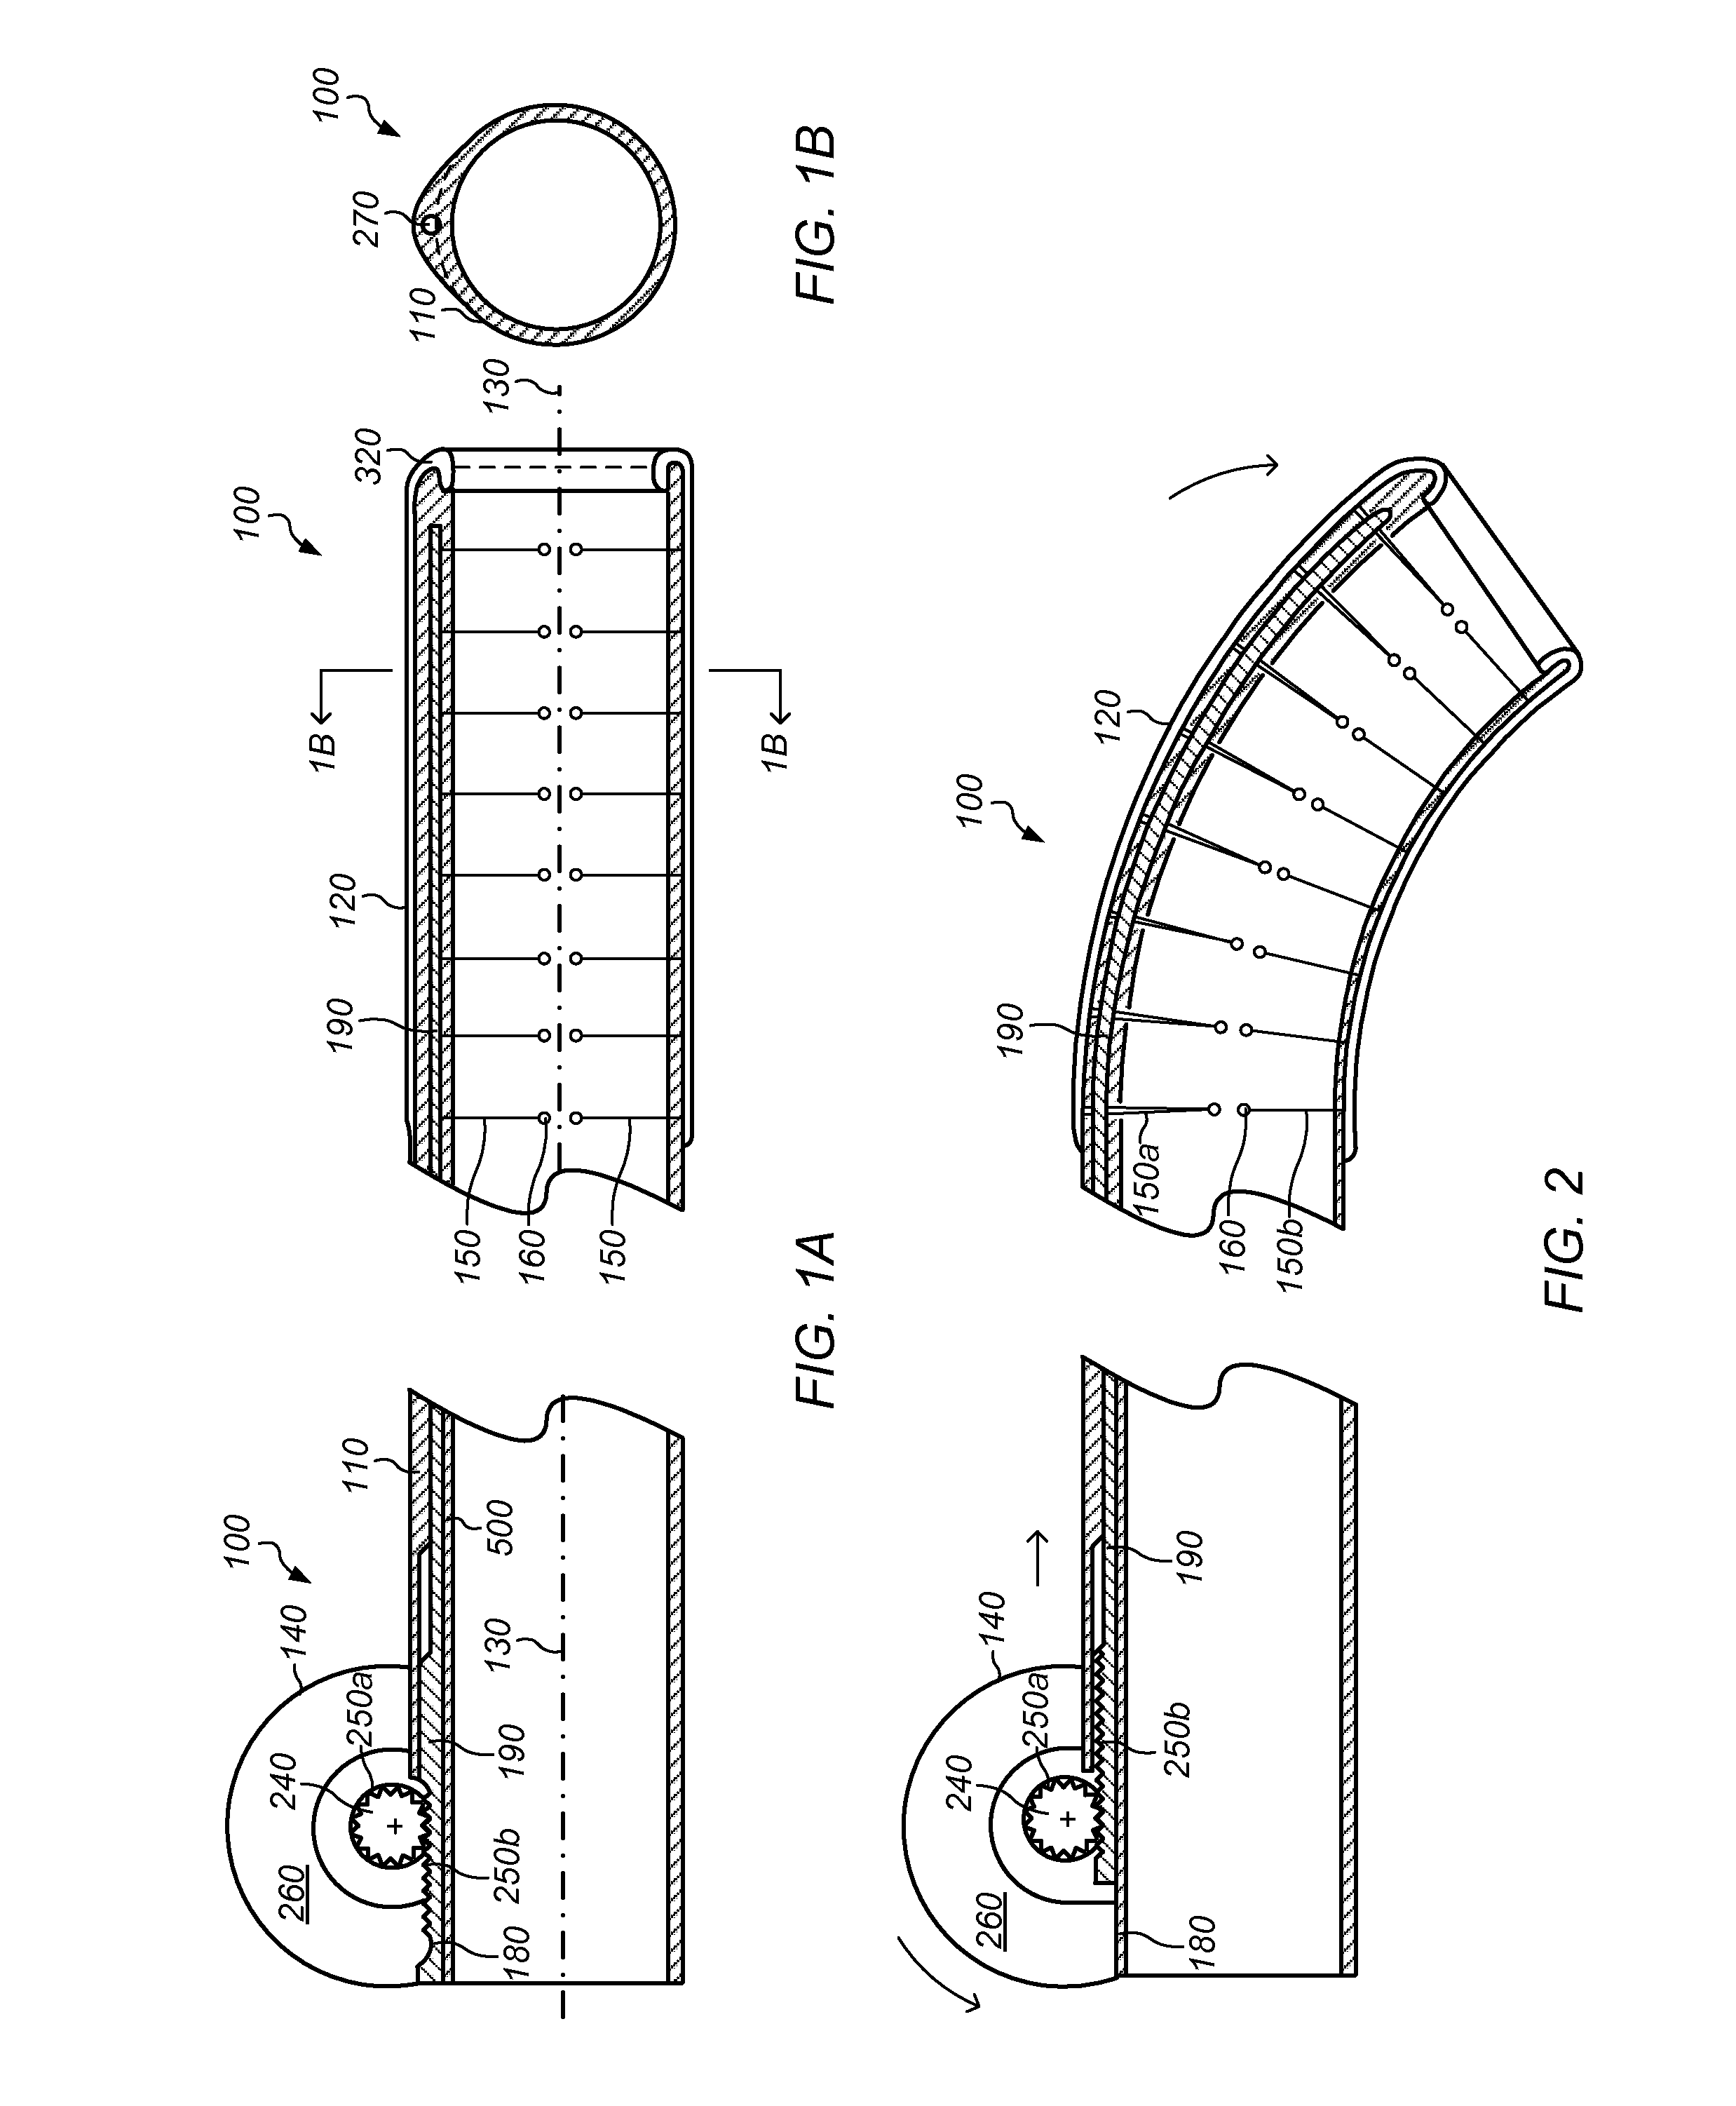 Method and system for performing spinal surgical procedures using natural orifices